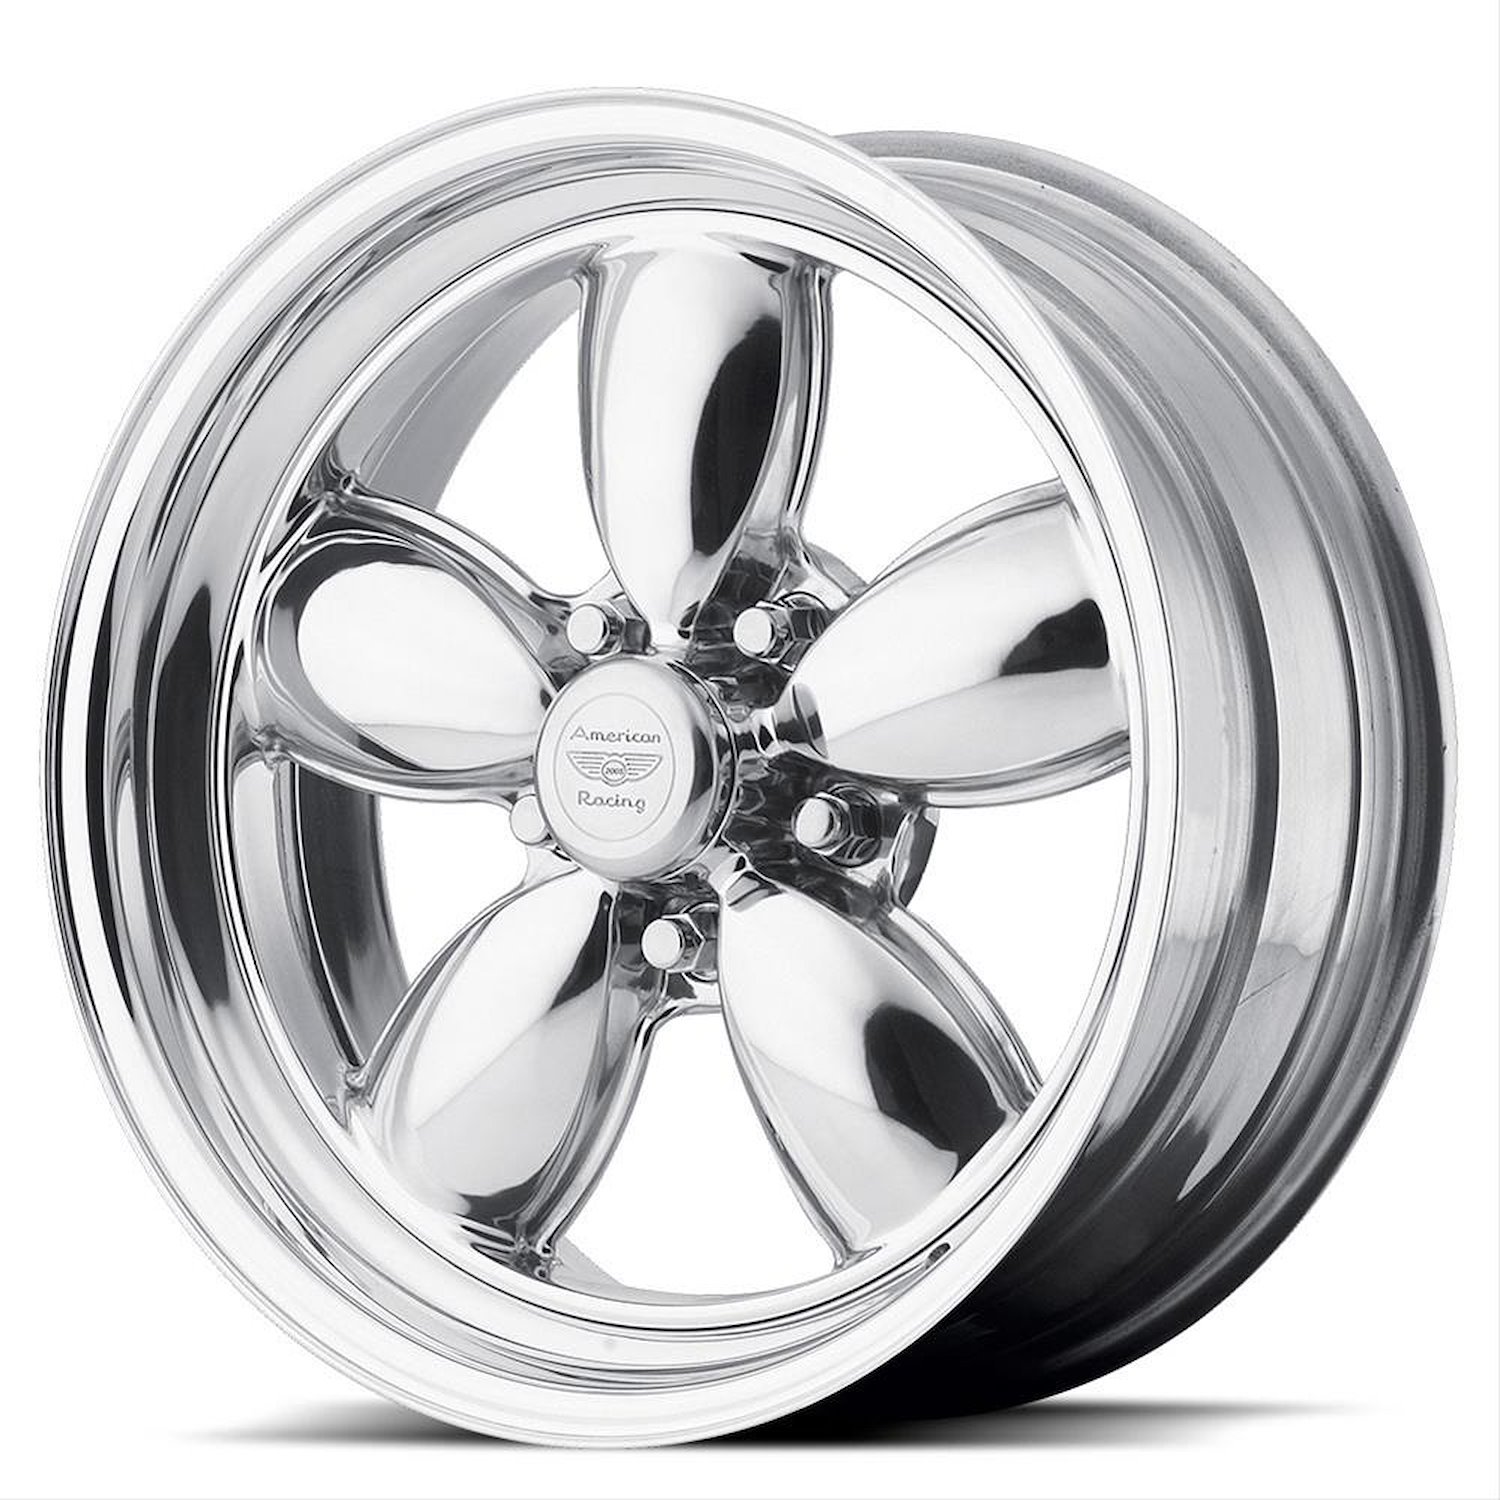 AMERICAN RACING CLASSIC 200S TWO-PIECE POLISHED 15 x 7 5x4.5 0 4.00